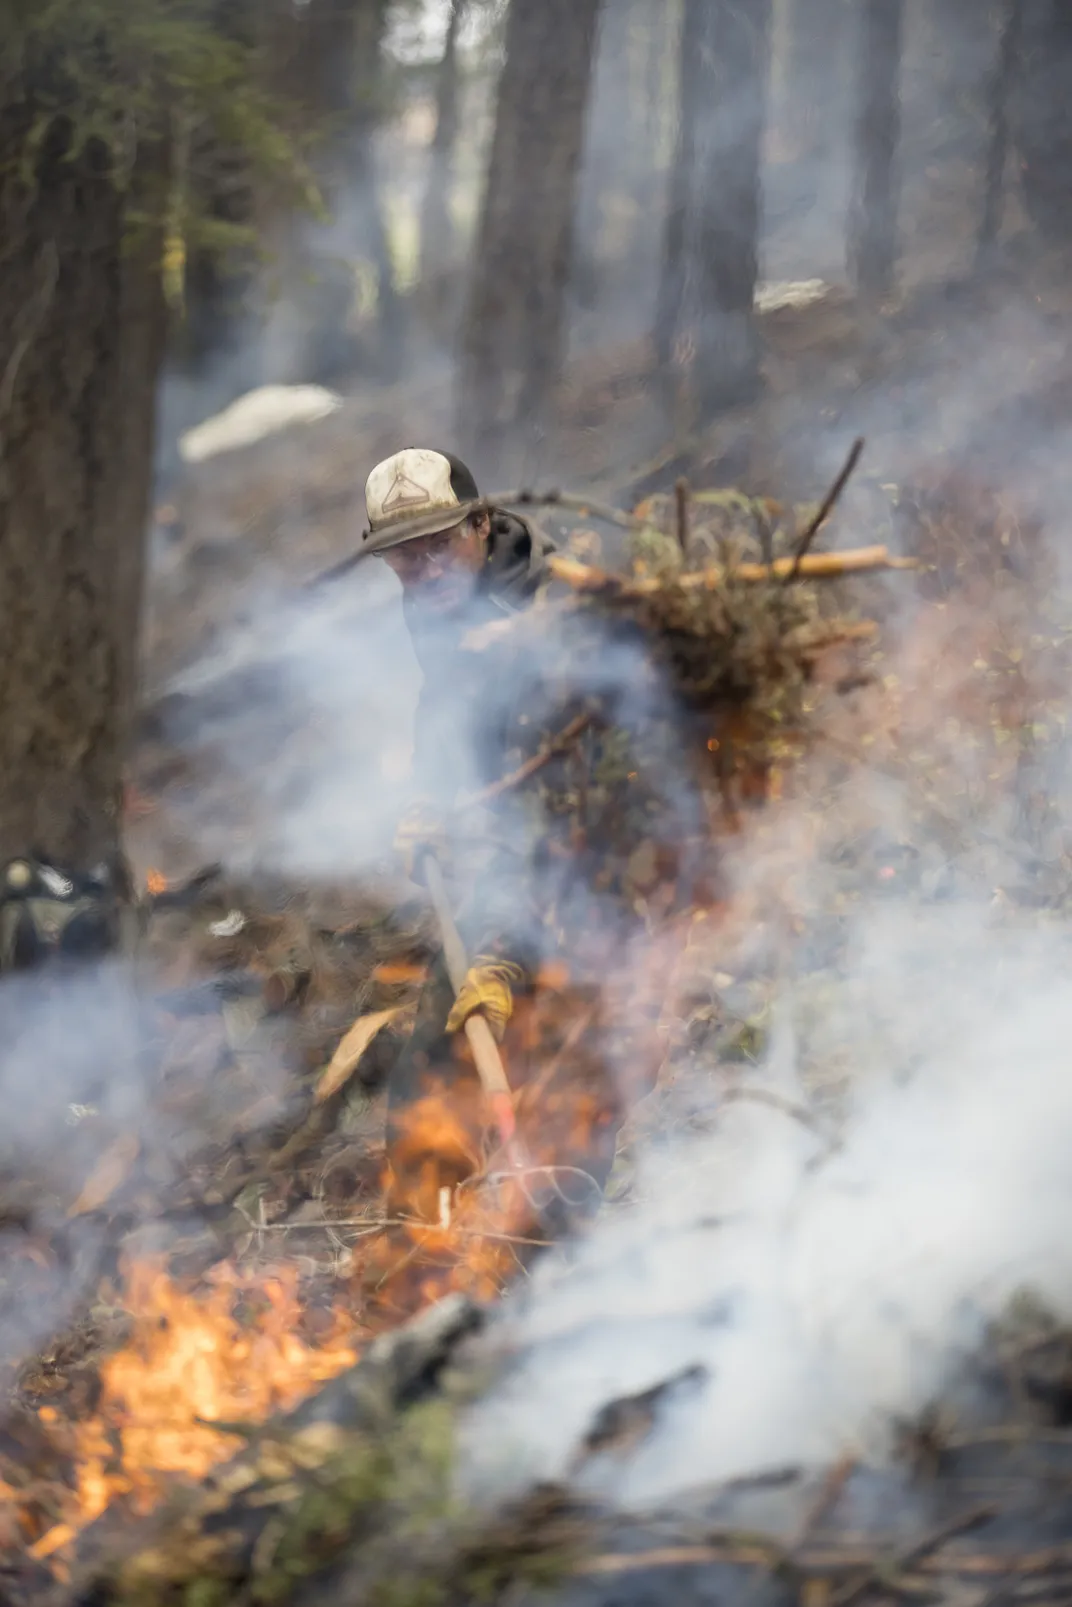 Saylor Flett forks branches onto a burn pile on his property near Quincy, California. By reducing surface fuels, trimming small trees and removing dead or fallen trees, Flett creates a defensible space around his home so that flames will have less fuel in